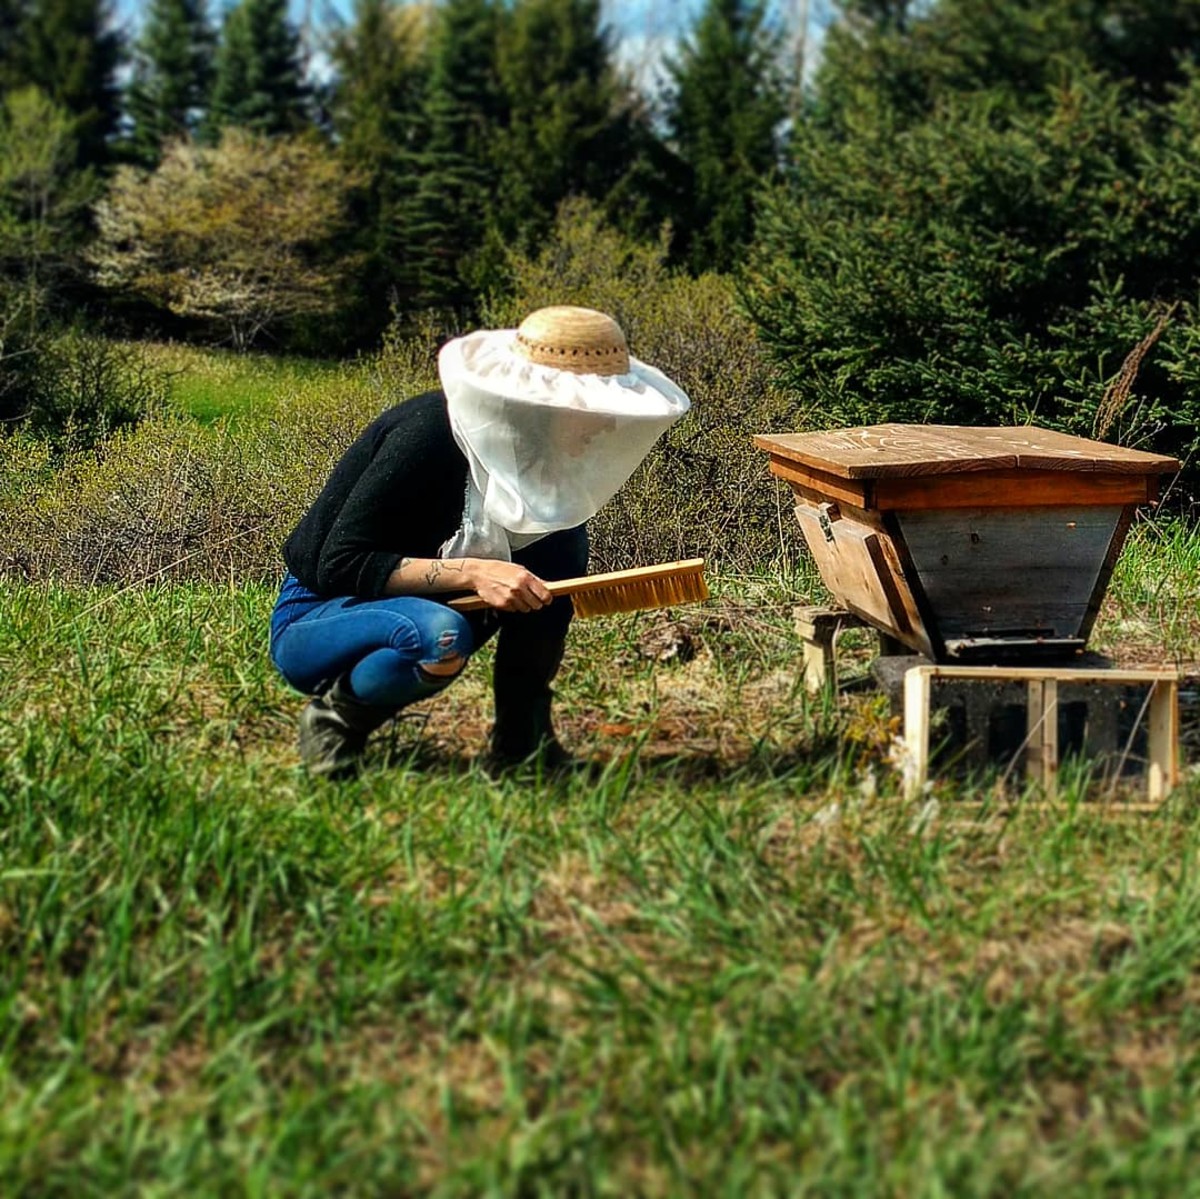 Checking in on the Top Bar hive. When it's harvest time, the comb is crushed and the honey is strained from the beeswax.